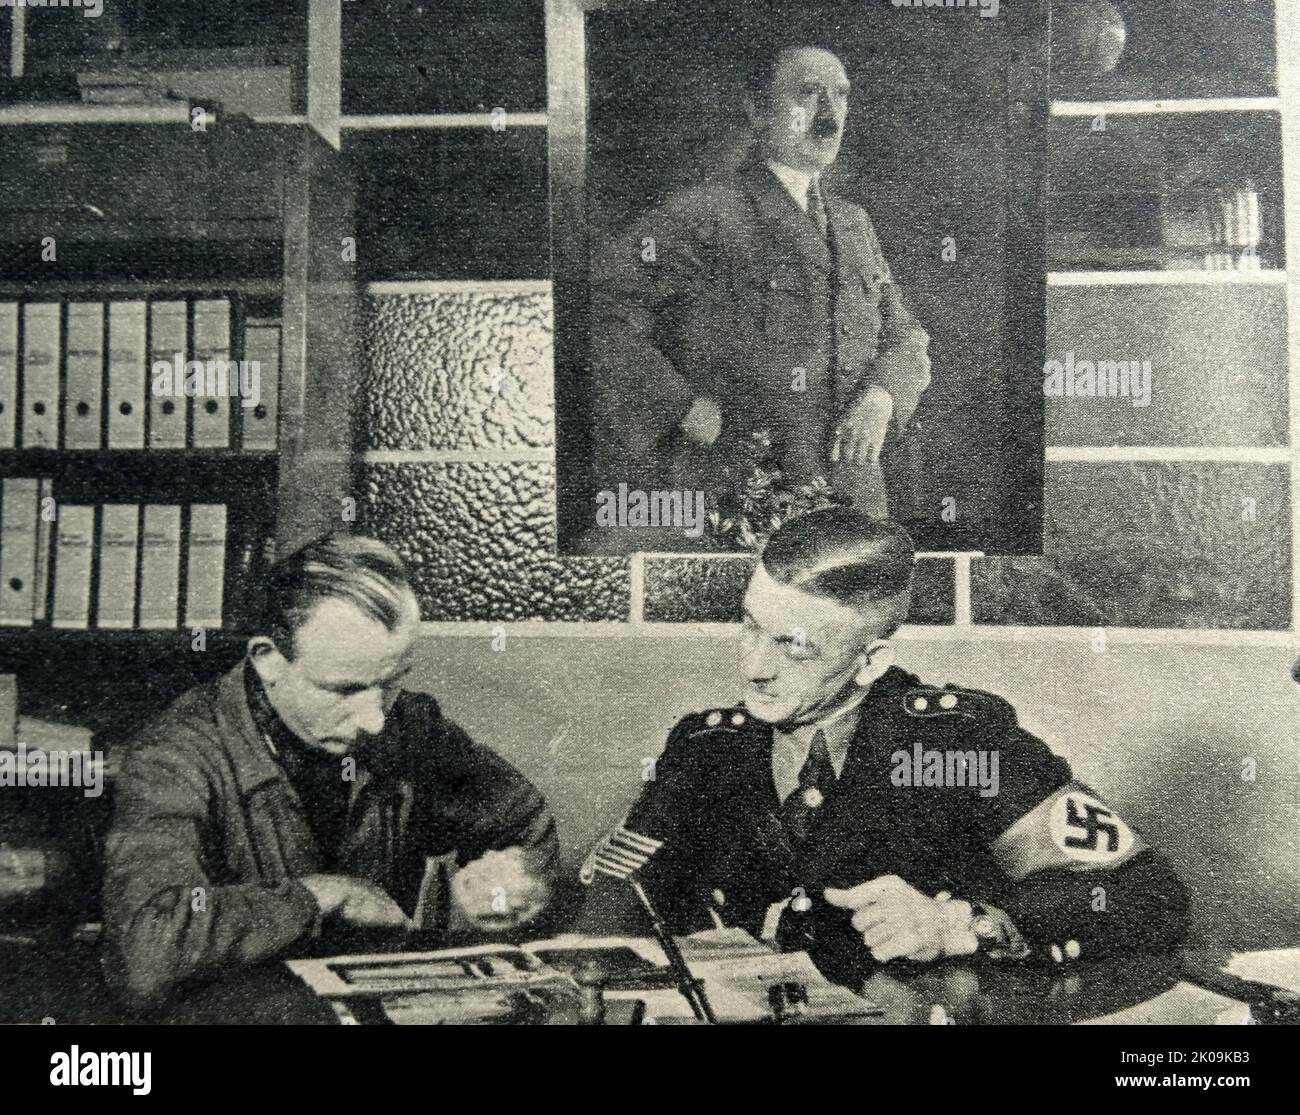 Nazi Storm Trooper Johann Laub consults holiday literature helped by a Nazi official. The Sturmabteilung was the Nazi Party's original paramilitary wing. It played a significant role in Adolf Hitler's rise to power in the 1920s and 1930s. Stock Photo